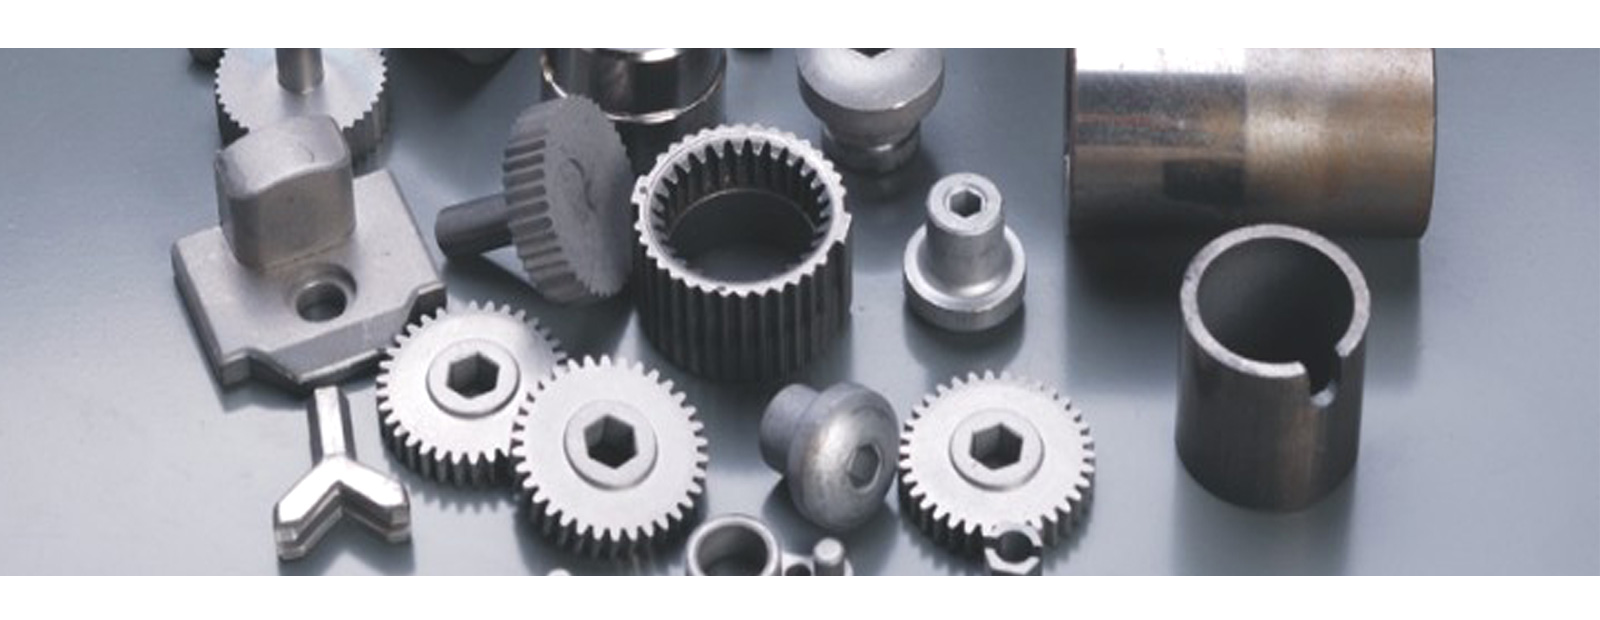 Powder Metallurgy Gear and Componets